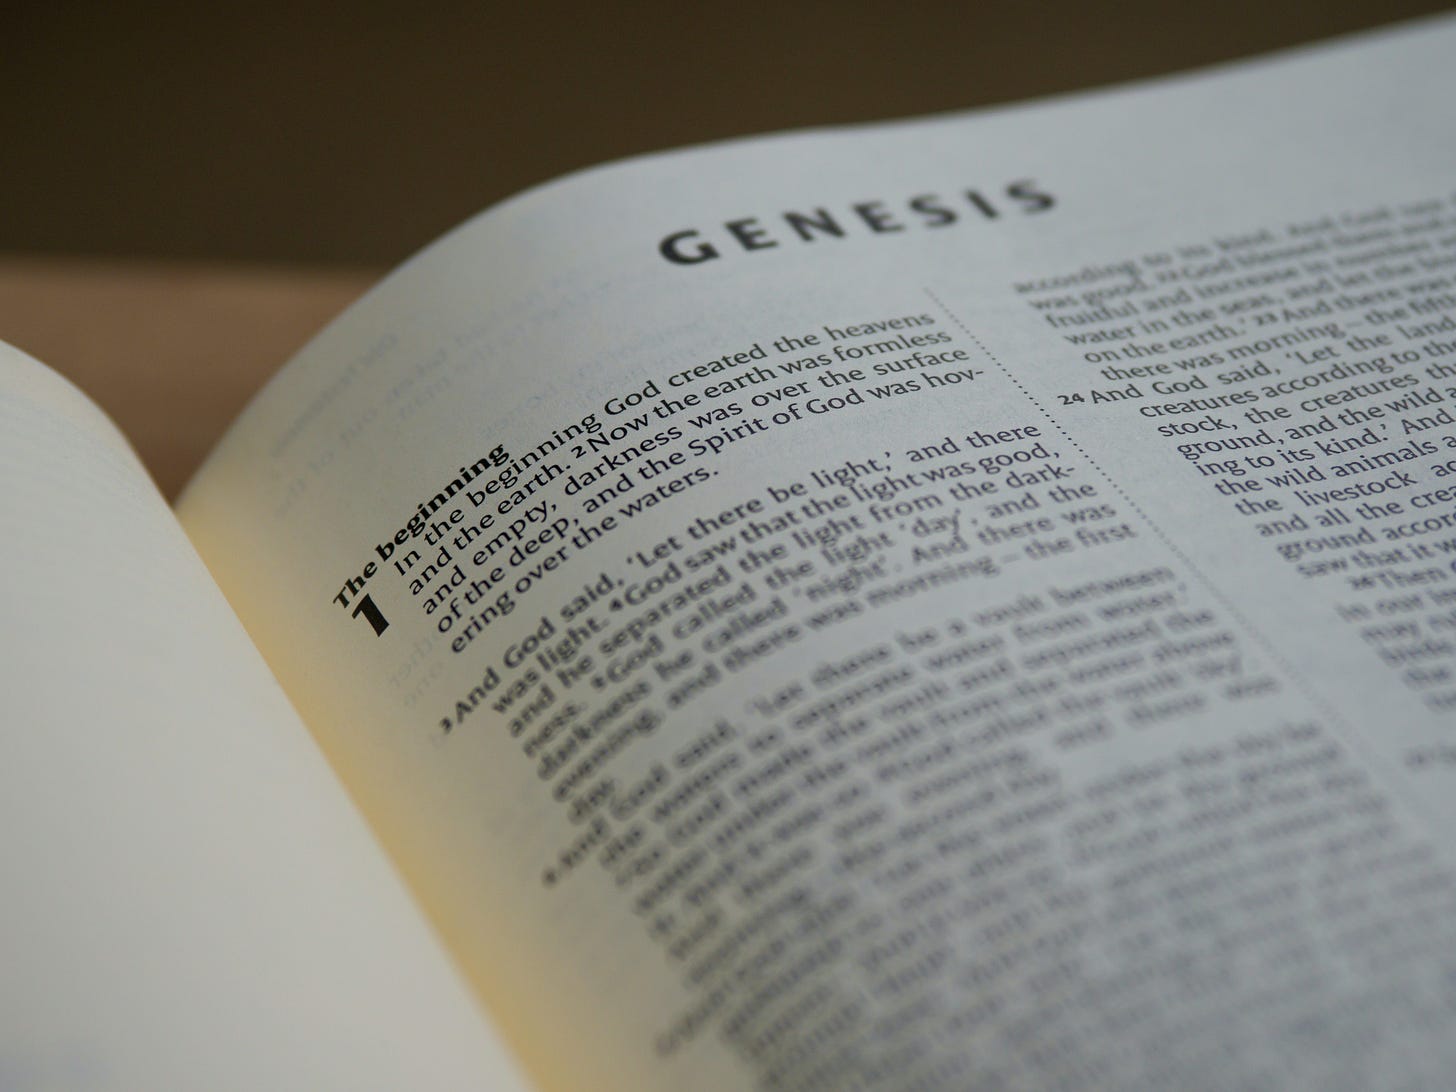 A Bible opened to Genesis.